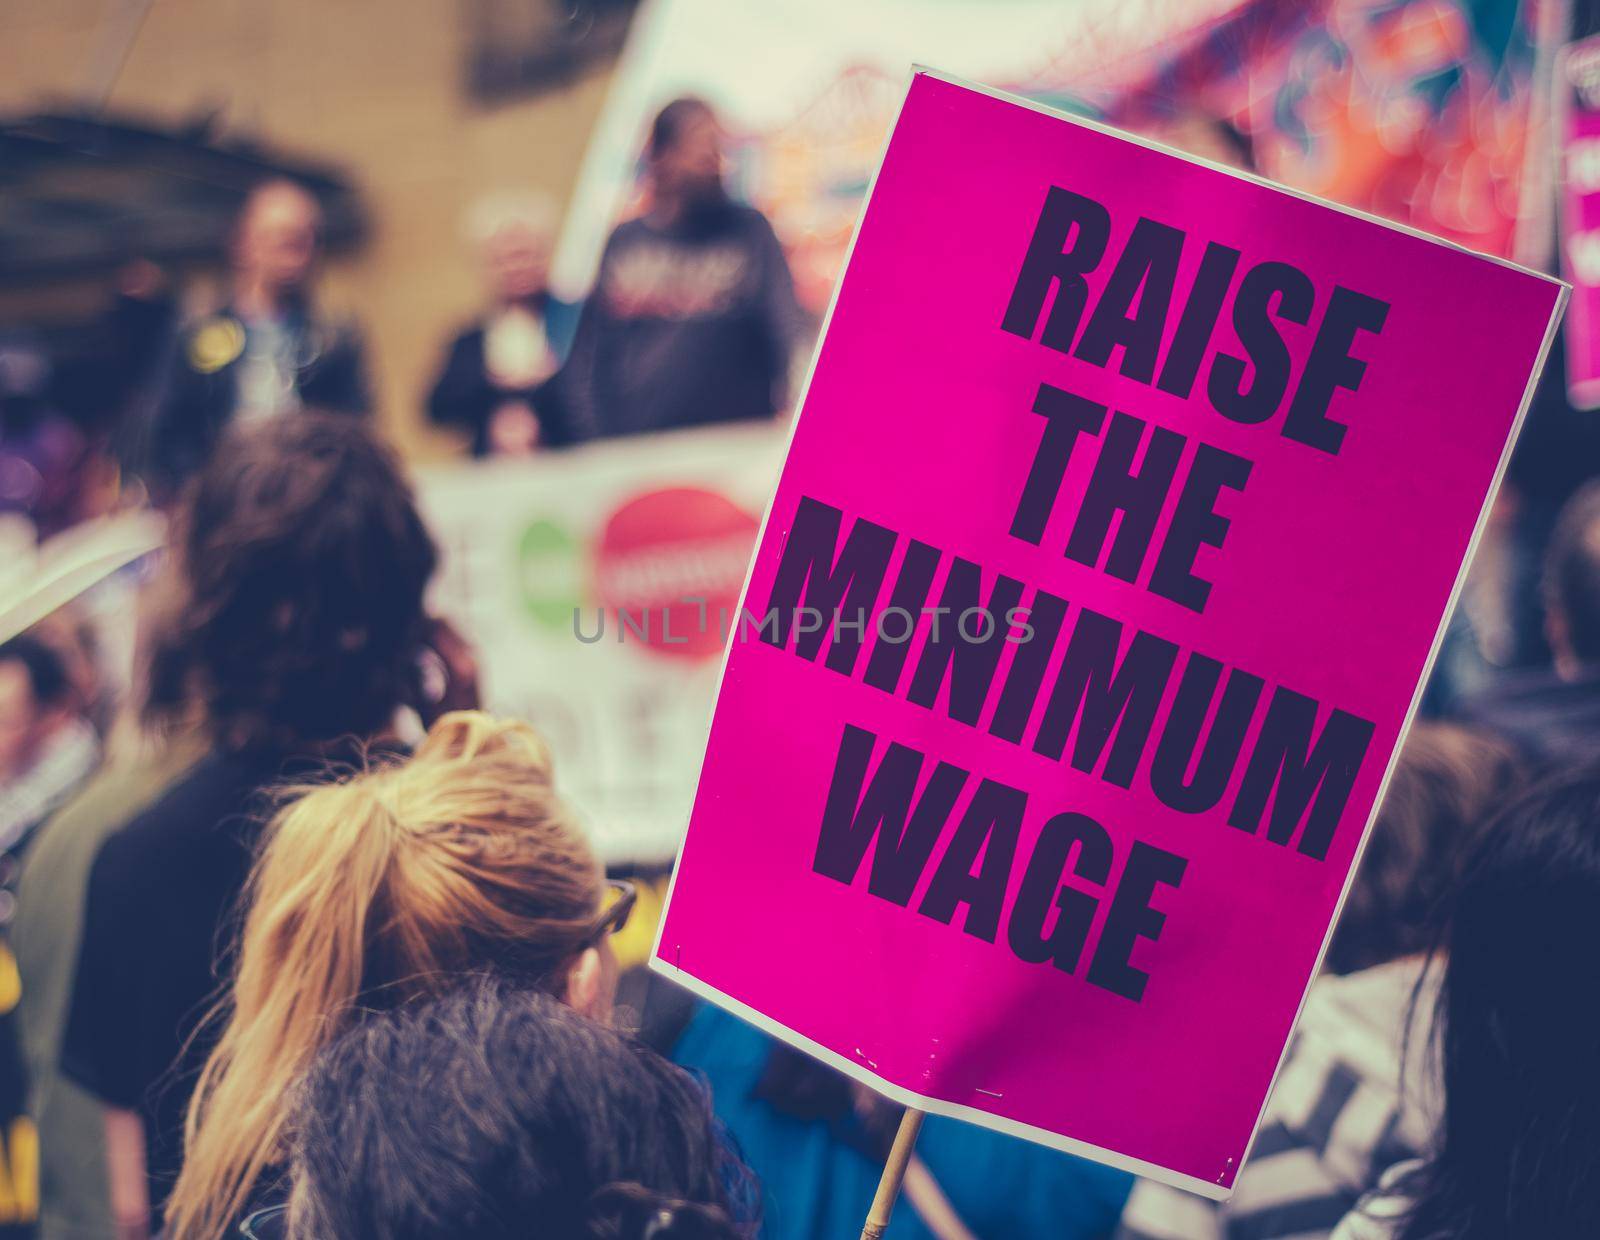 A Raise The Minimum Wage Sign At Worker's Rights Protest Or Rally